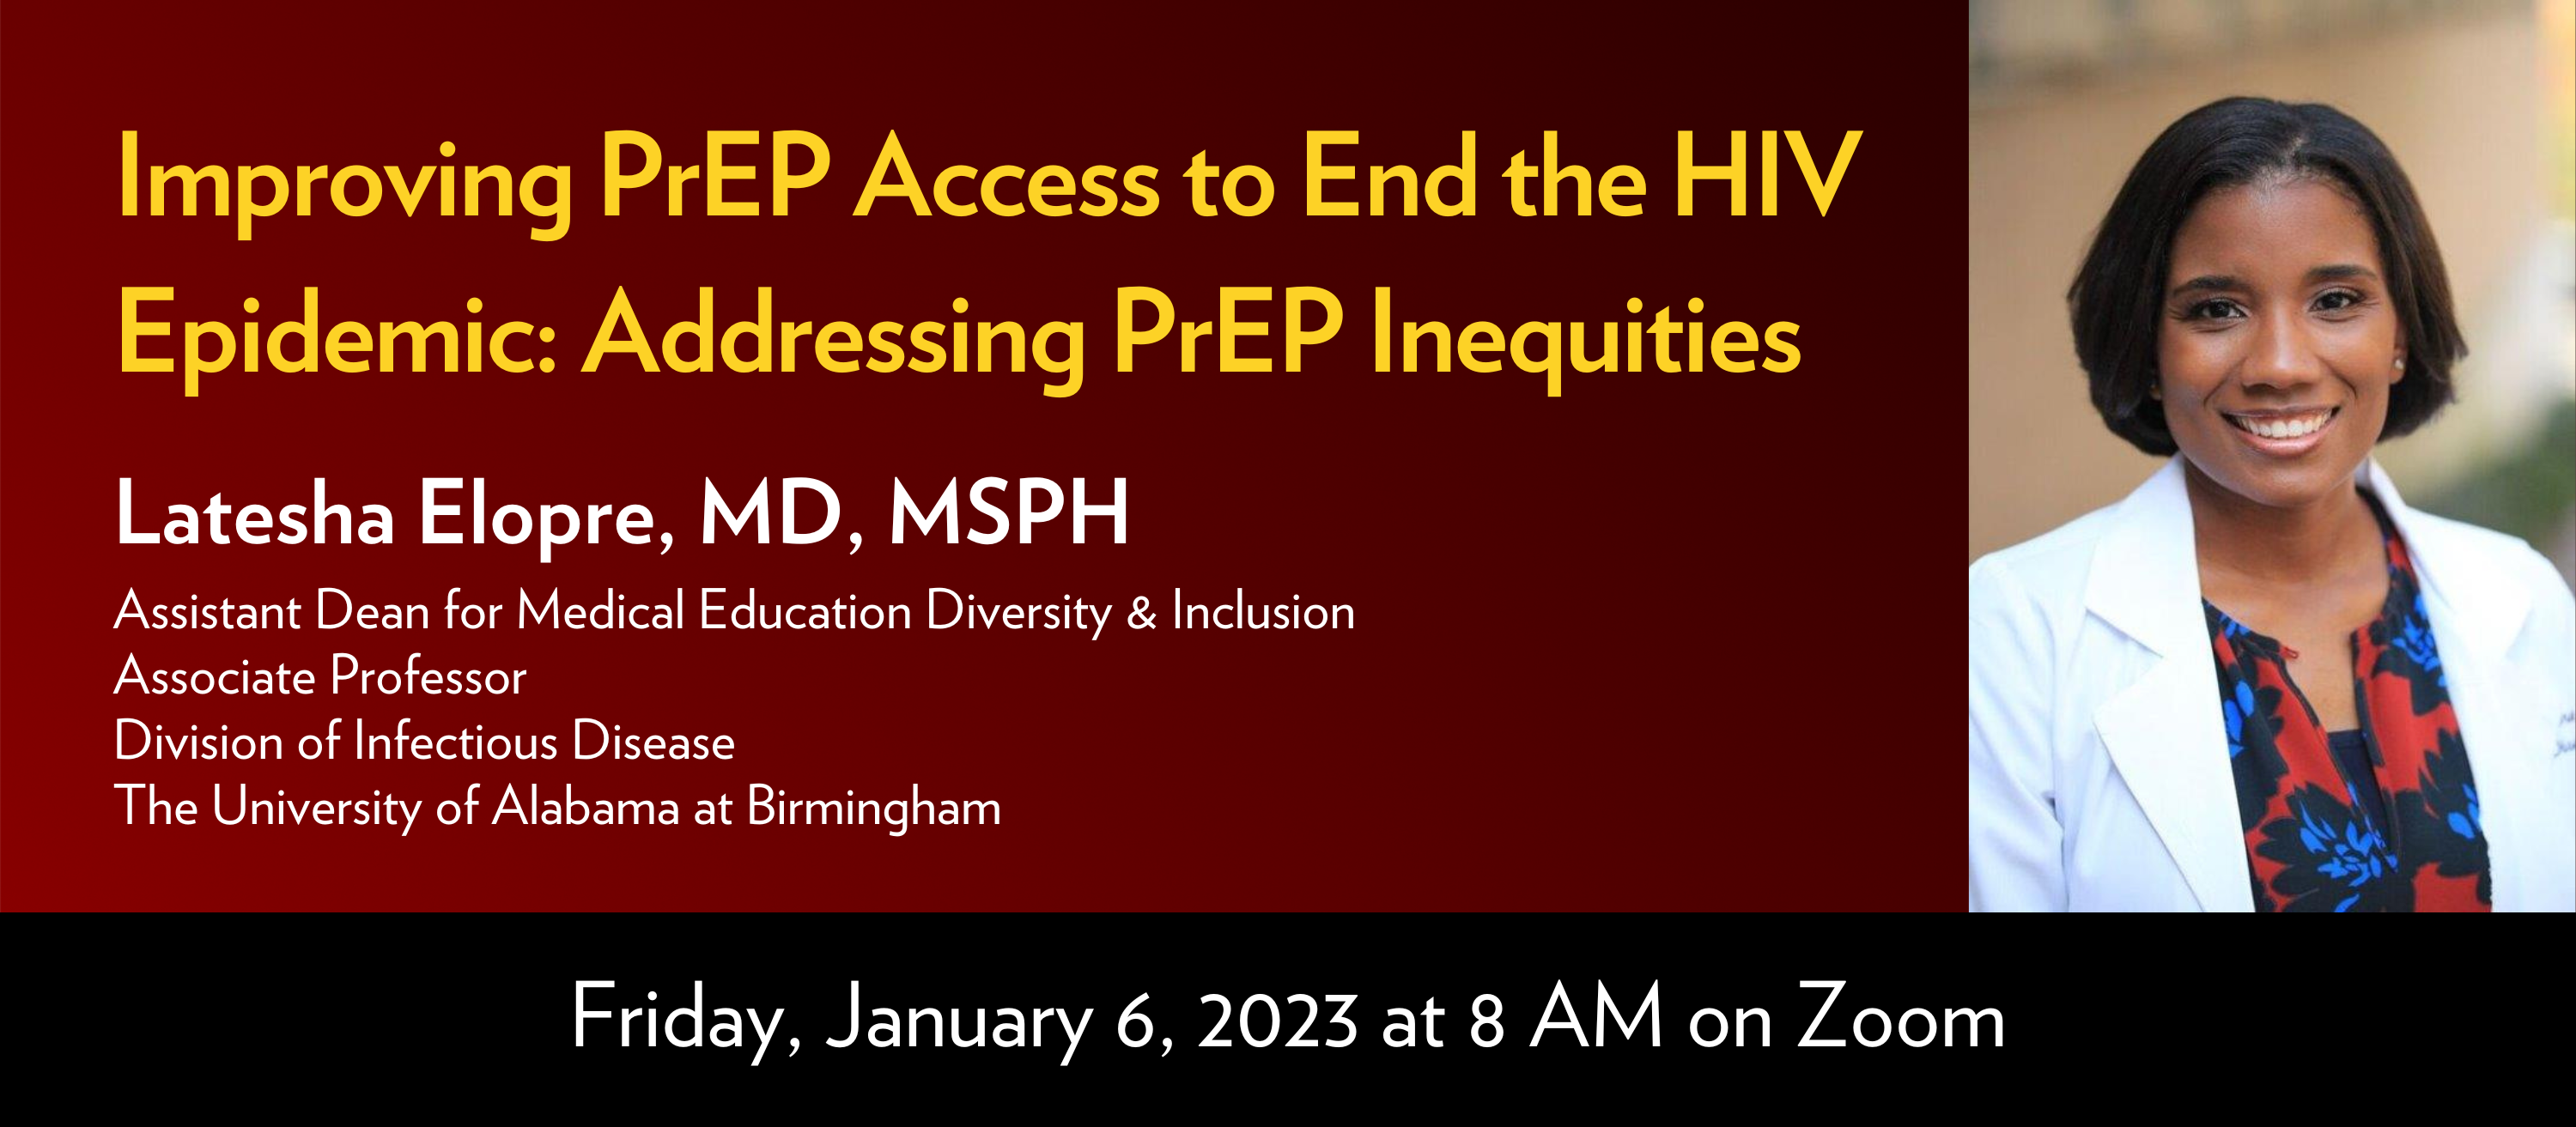 Title: Improving PrEP Access to End the HIV Epidemic: Addressing PrEP Inequities